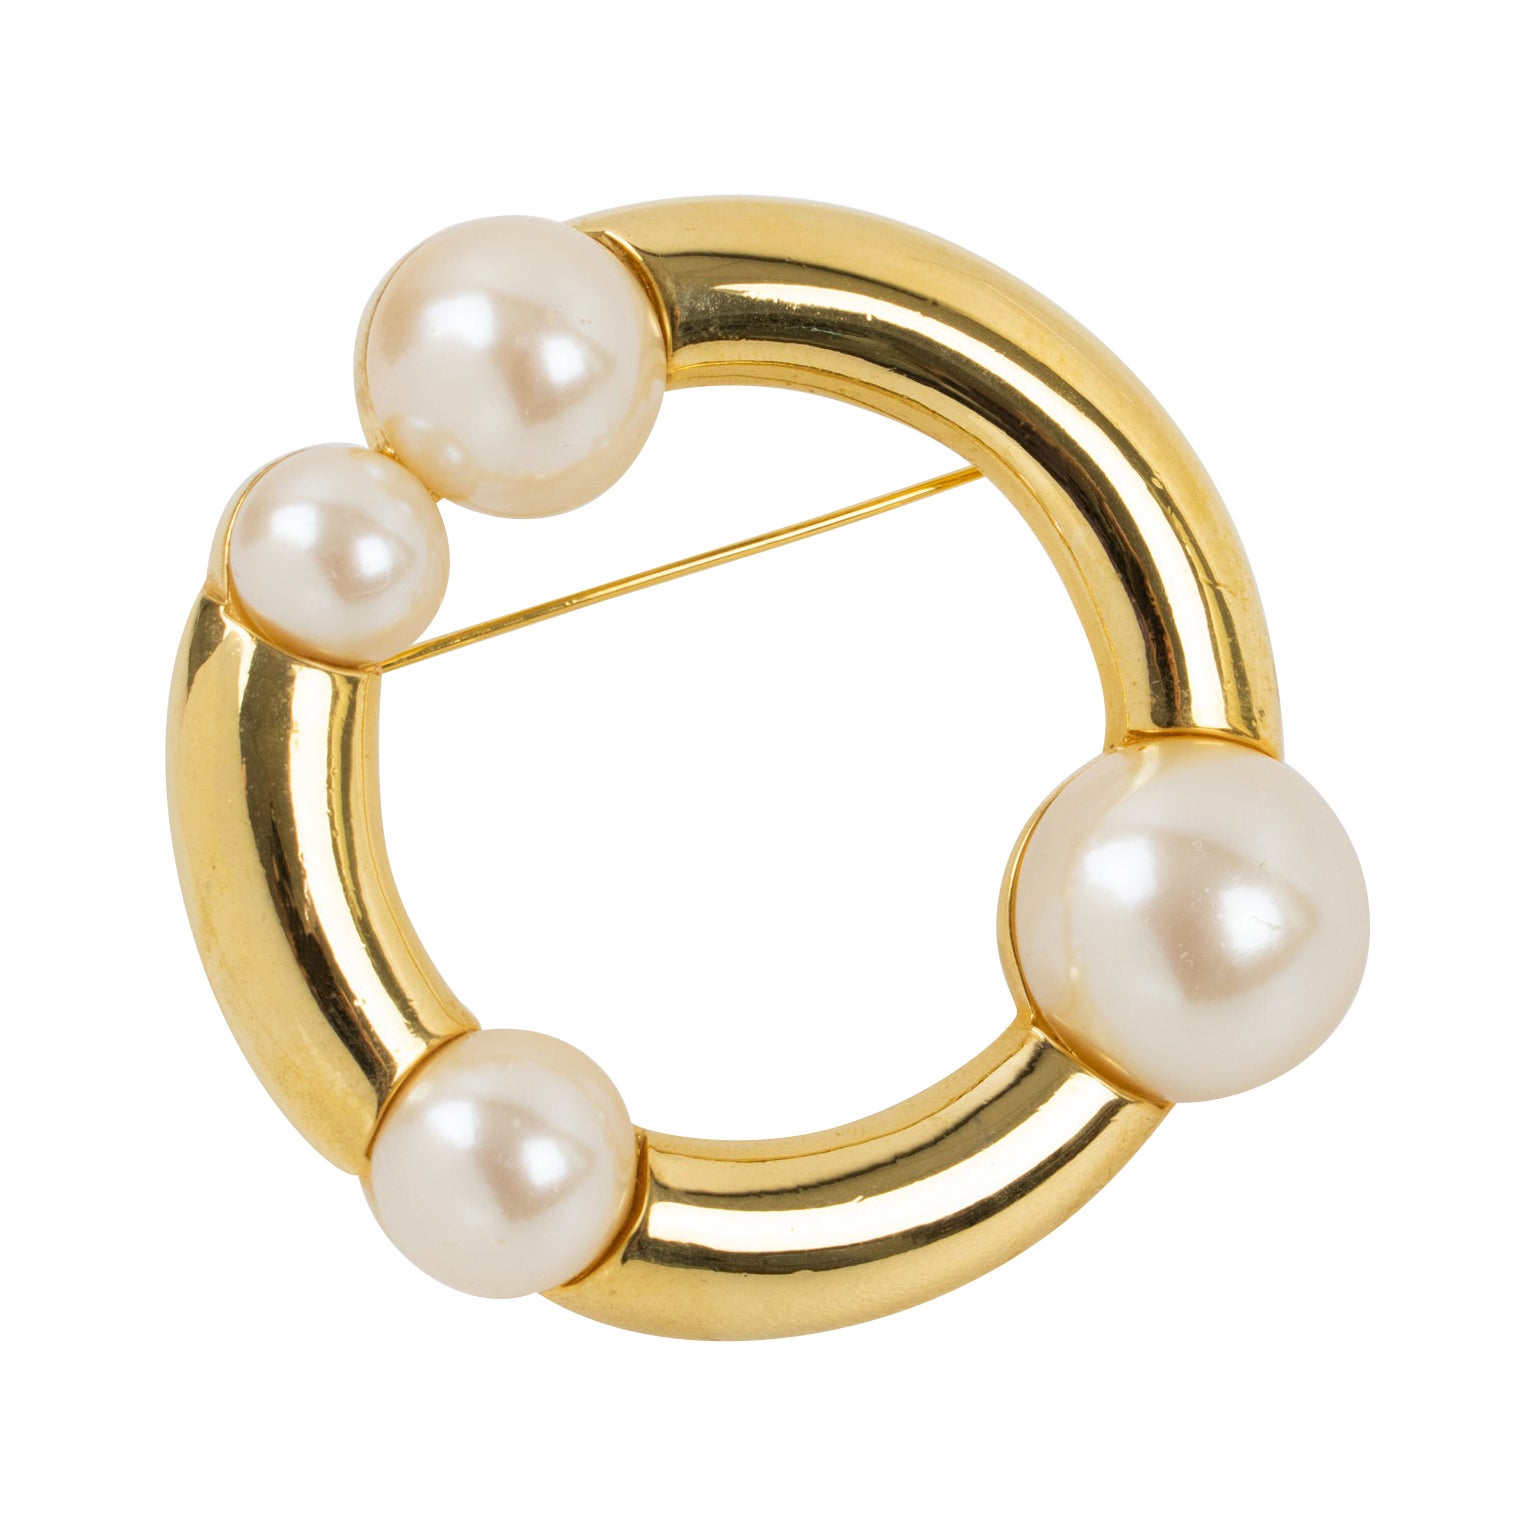 Courreges Paris Gilt Metal and Pearl Modernist Pin Brooch